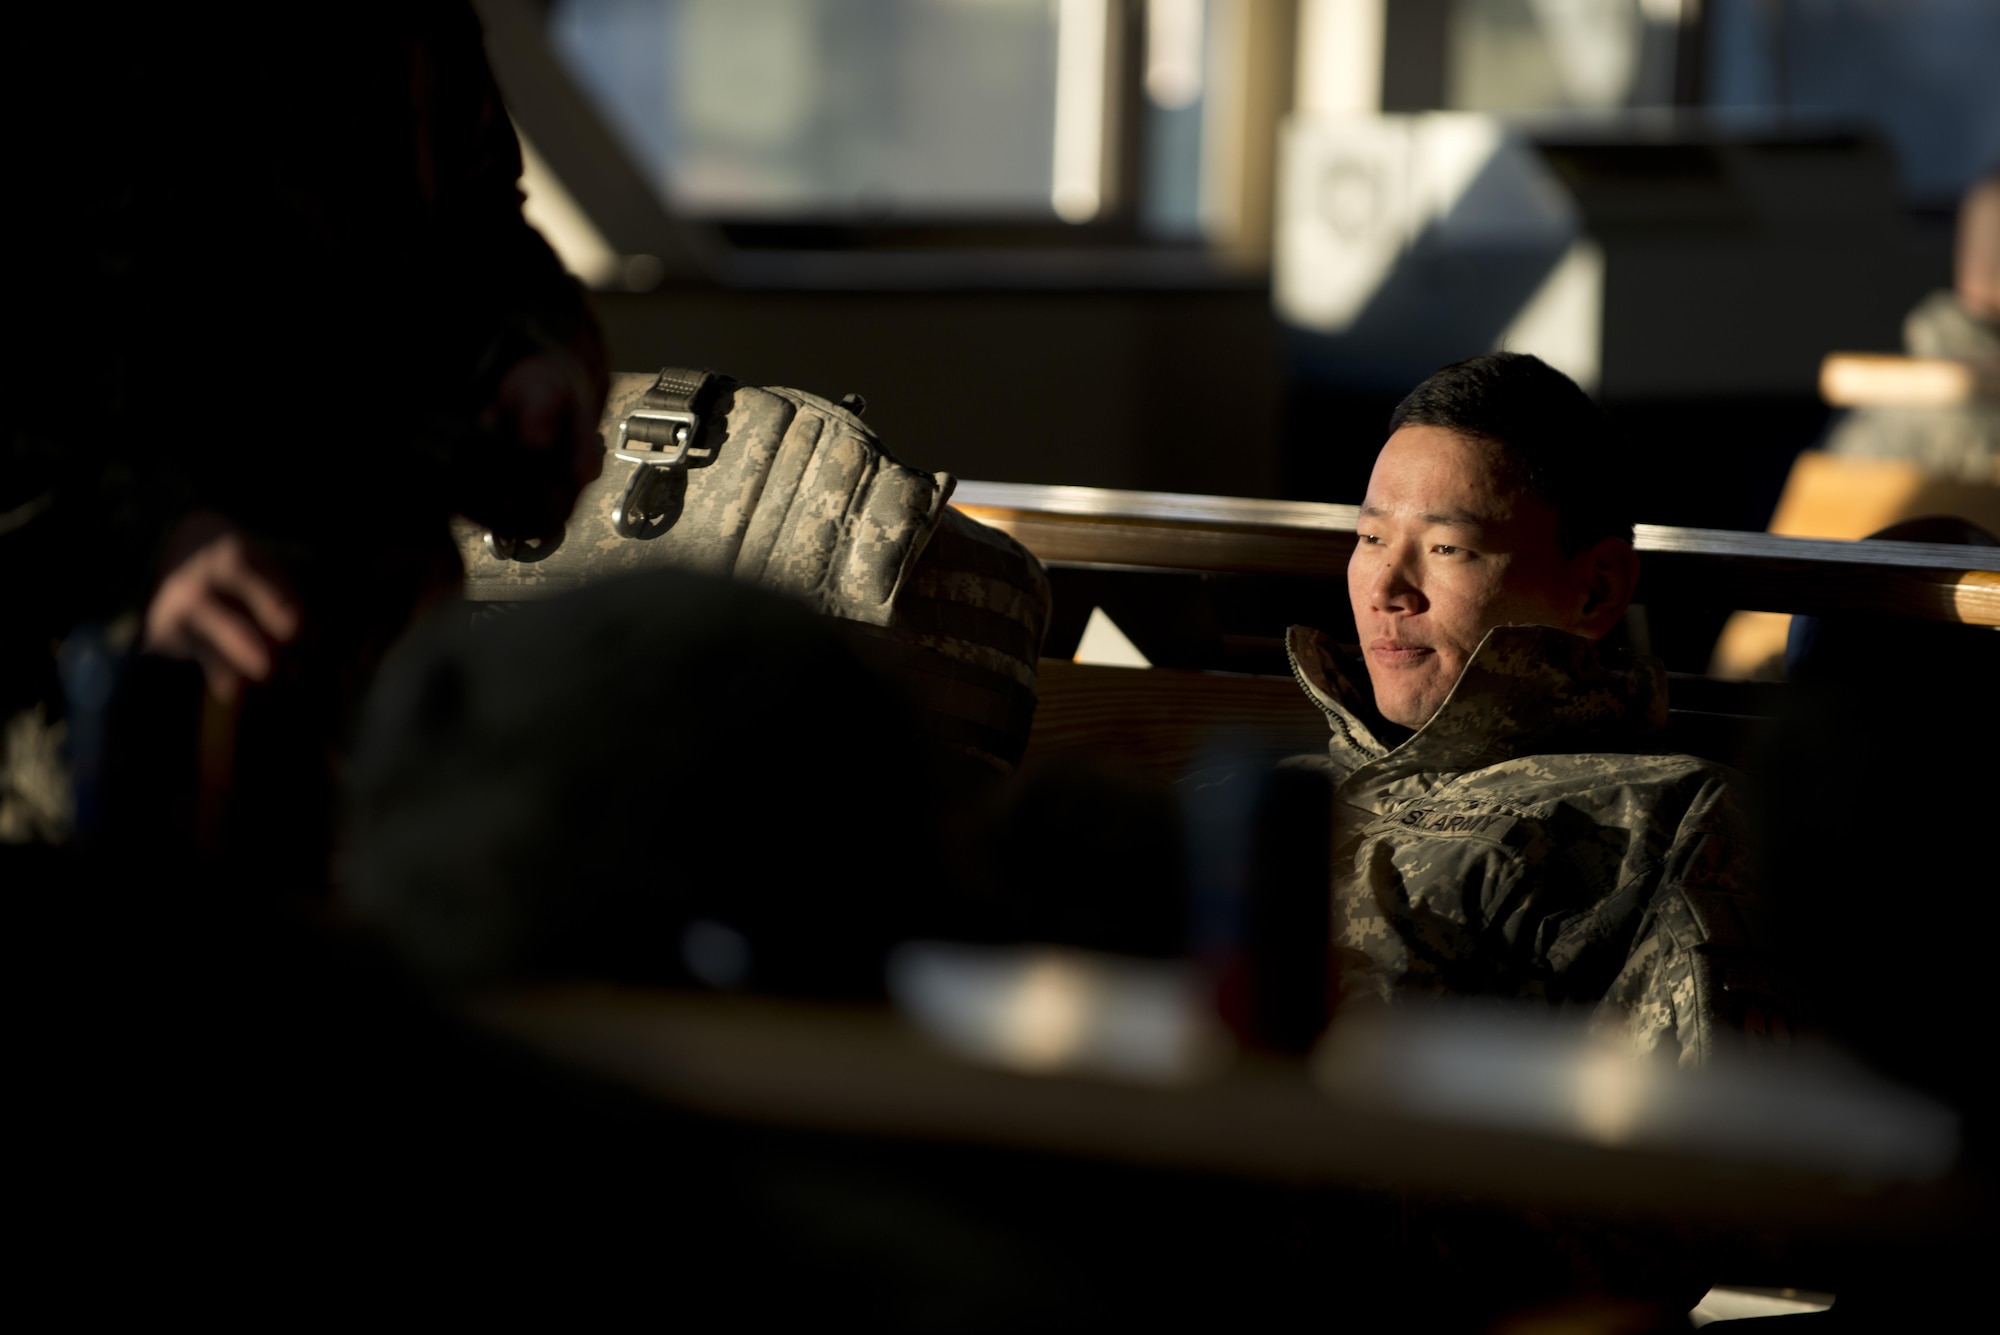 A paratrooper with the 4th Infantry Brigade Combat Team (Airborne), 25th Infantry Division, U.S. Army Alaska, waits in the Joint Mobility Complex to board an Air Force C-17 Globemaster III for a jump during Red-Flag Alaska 17-1 at Joint Base Elmendorf-Richardson, Alaska, Oct. 12, 2016. Red-Flag Alaska 17-1 provides joint offensive counter-air, interdiction, close air support, and large force employment training in a simulated combat environment. 